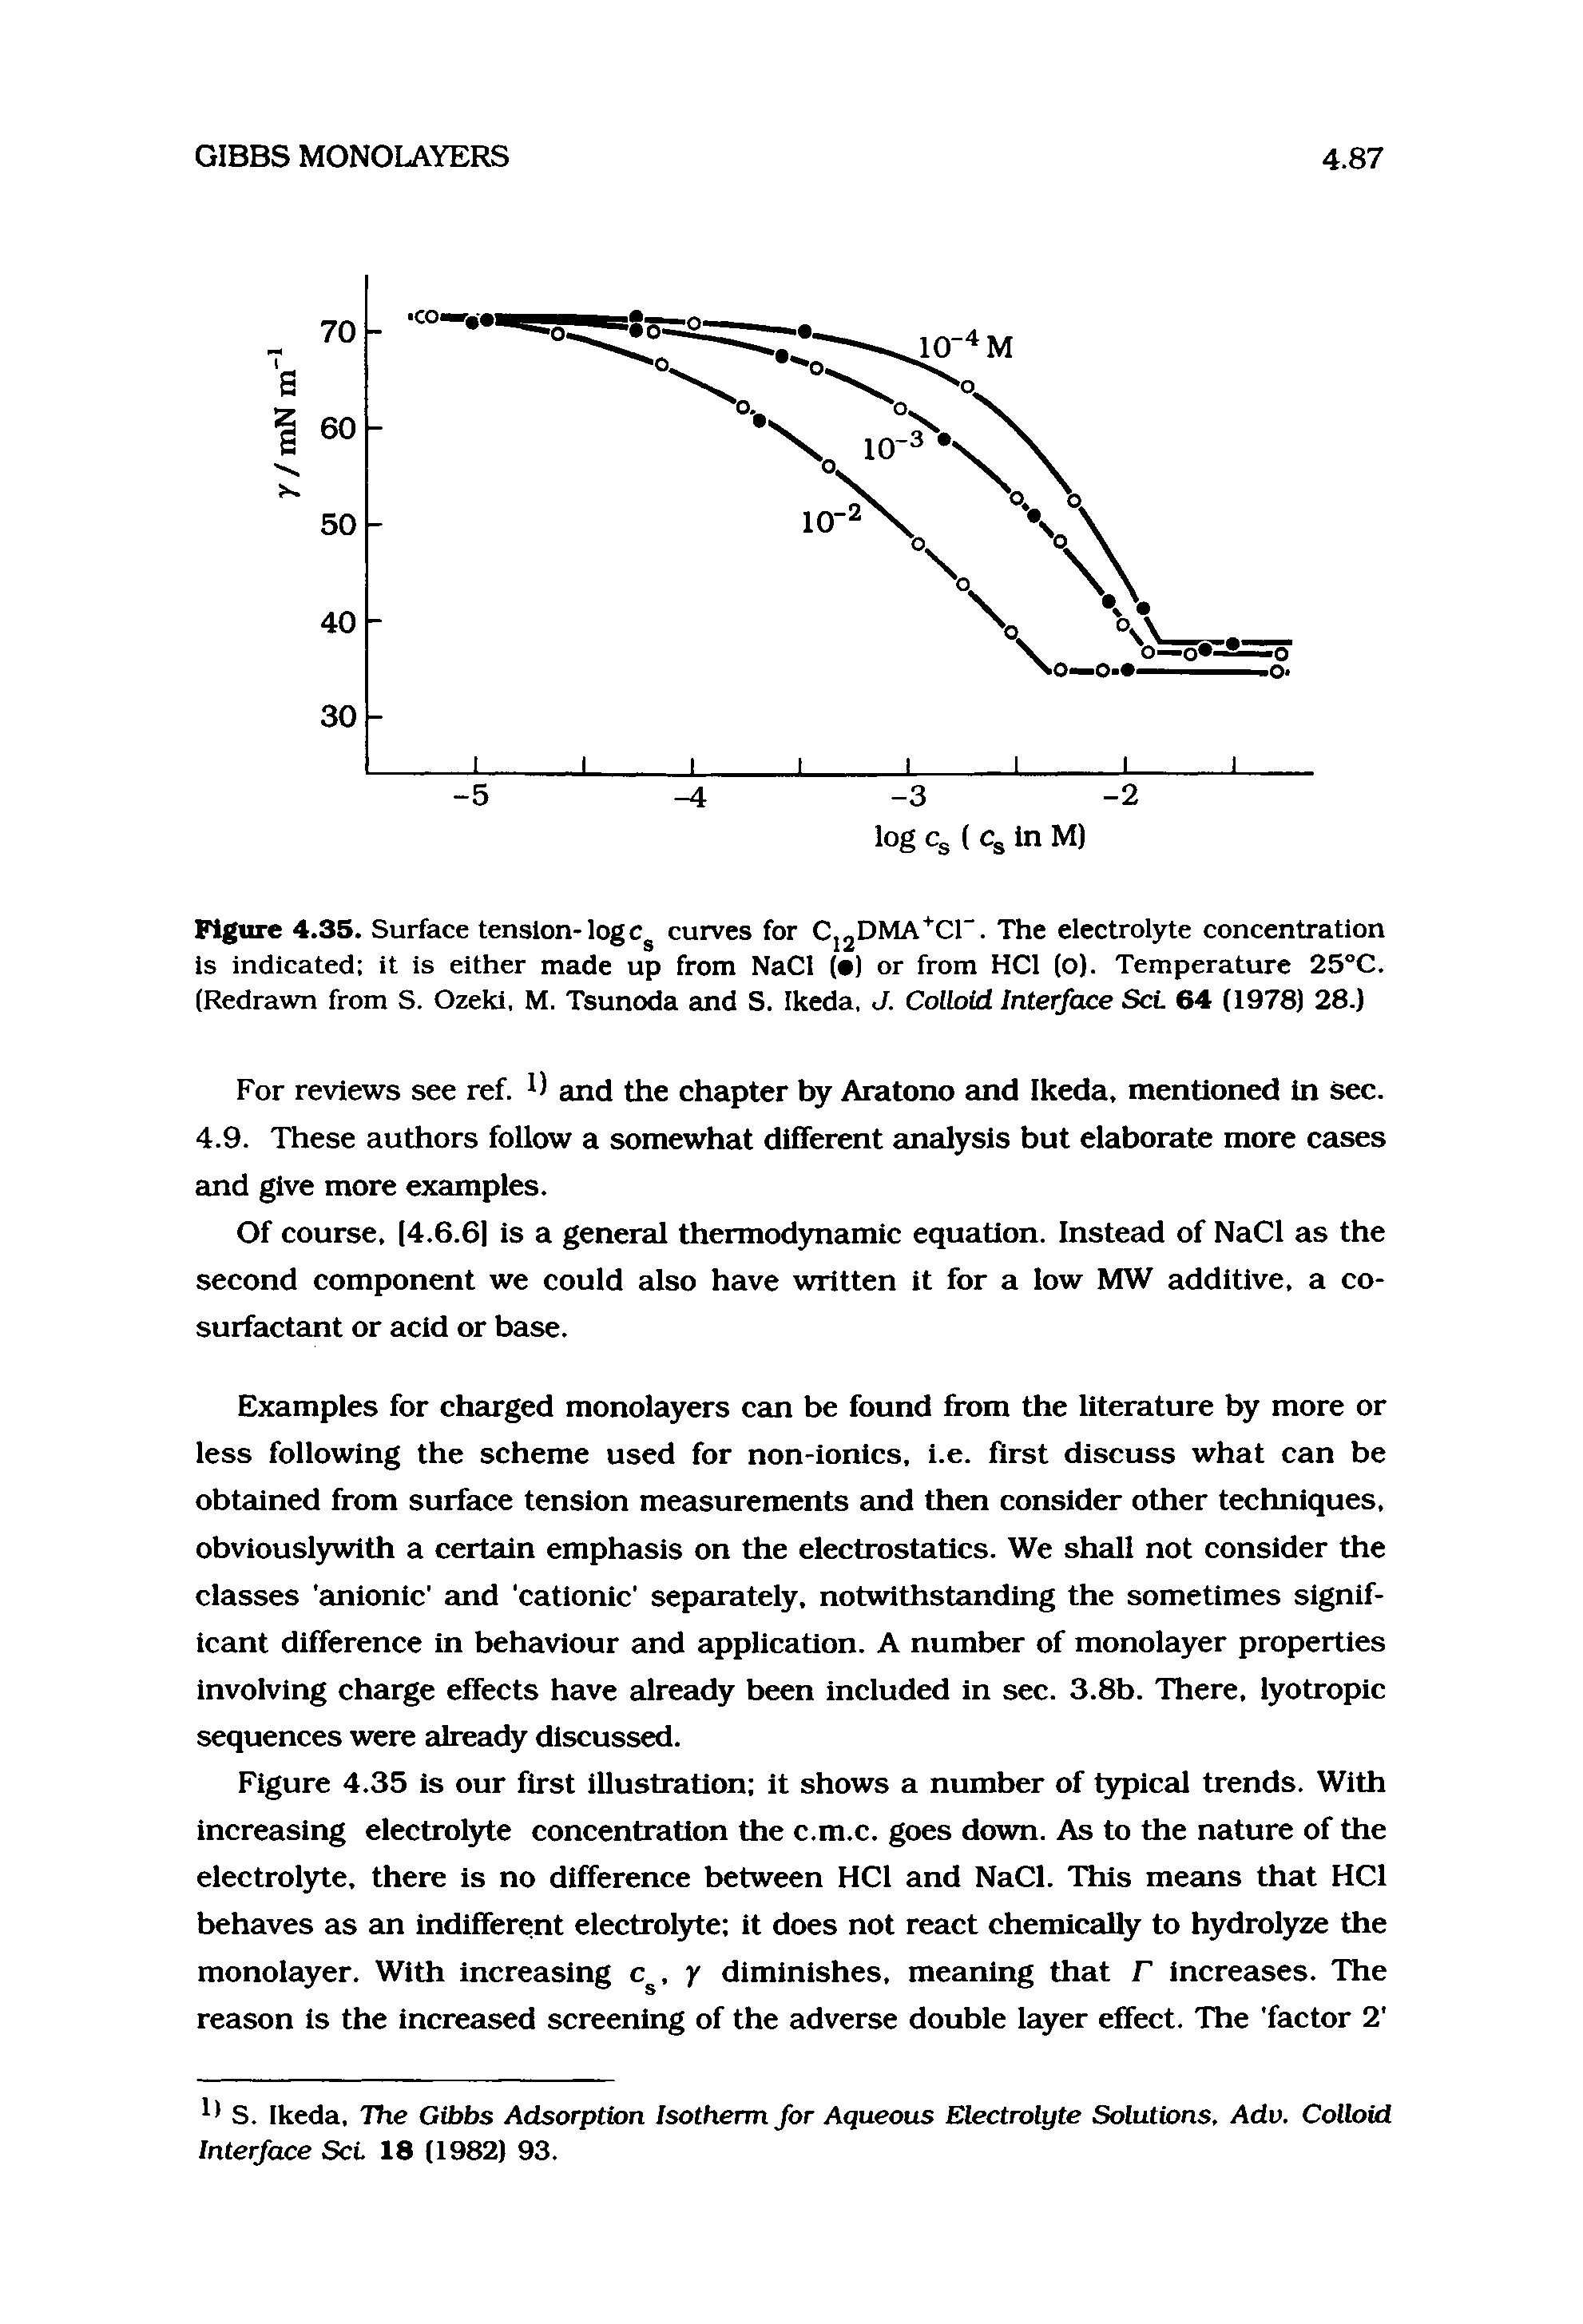 Figure 4.35. Surface tension-logcurves for CjjDMA cr. The electrolyte concentration Is indicated it is either made up from NaCl ( ) or from HCl (o). Temperature 25°C. (Redrawn from S. Ozekl, M. Tsunoda and S. Ikeda, J. Colloid Interface ScL 64 (1978) 28.)...